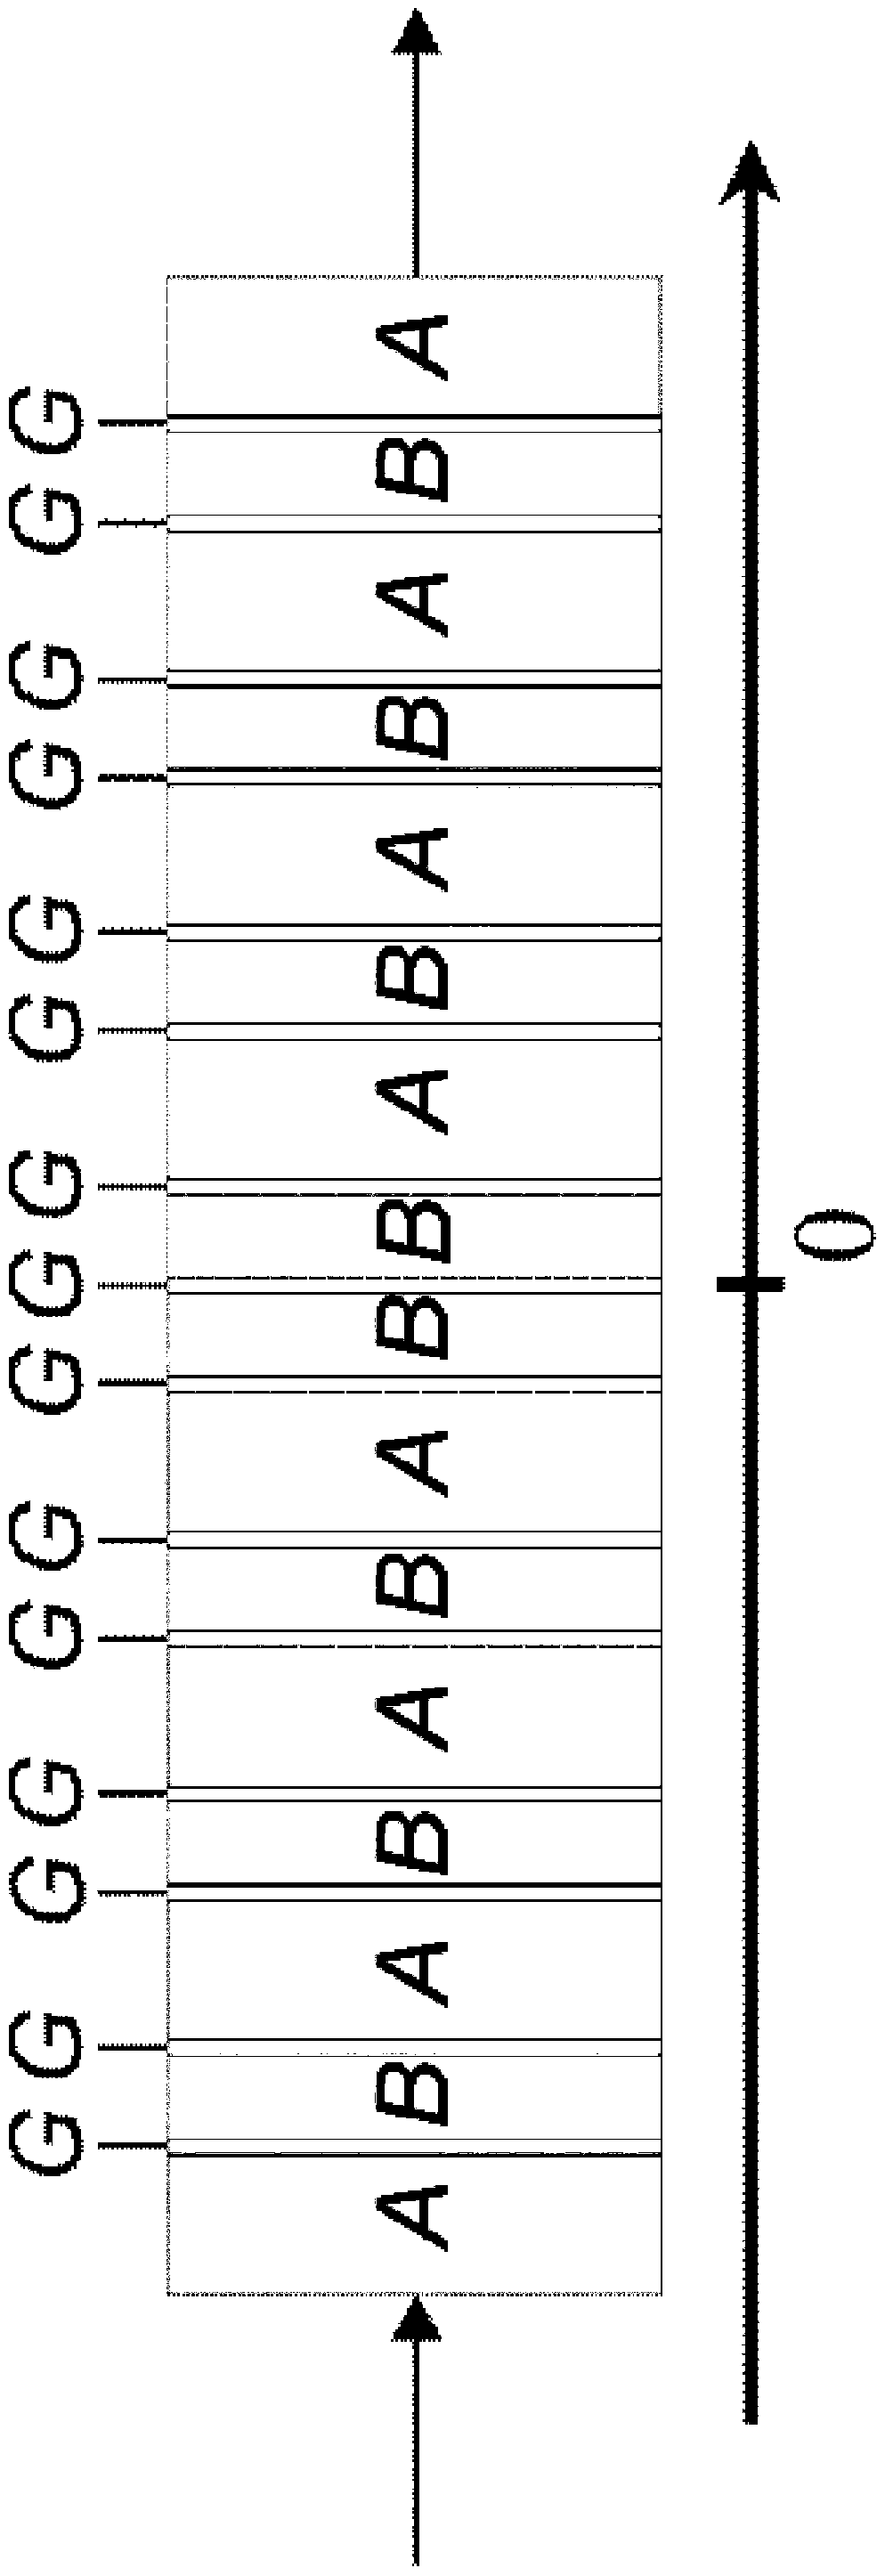 Optical bistable device applied to all-optical switch and optical memory